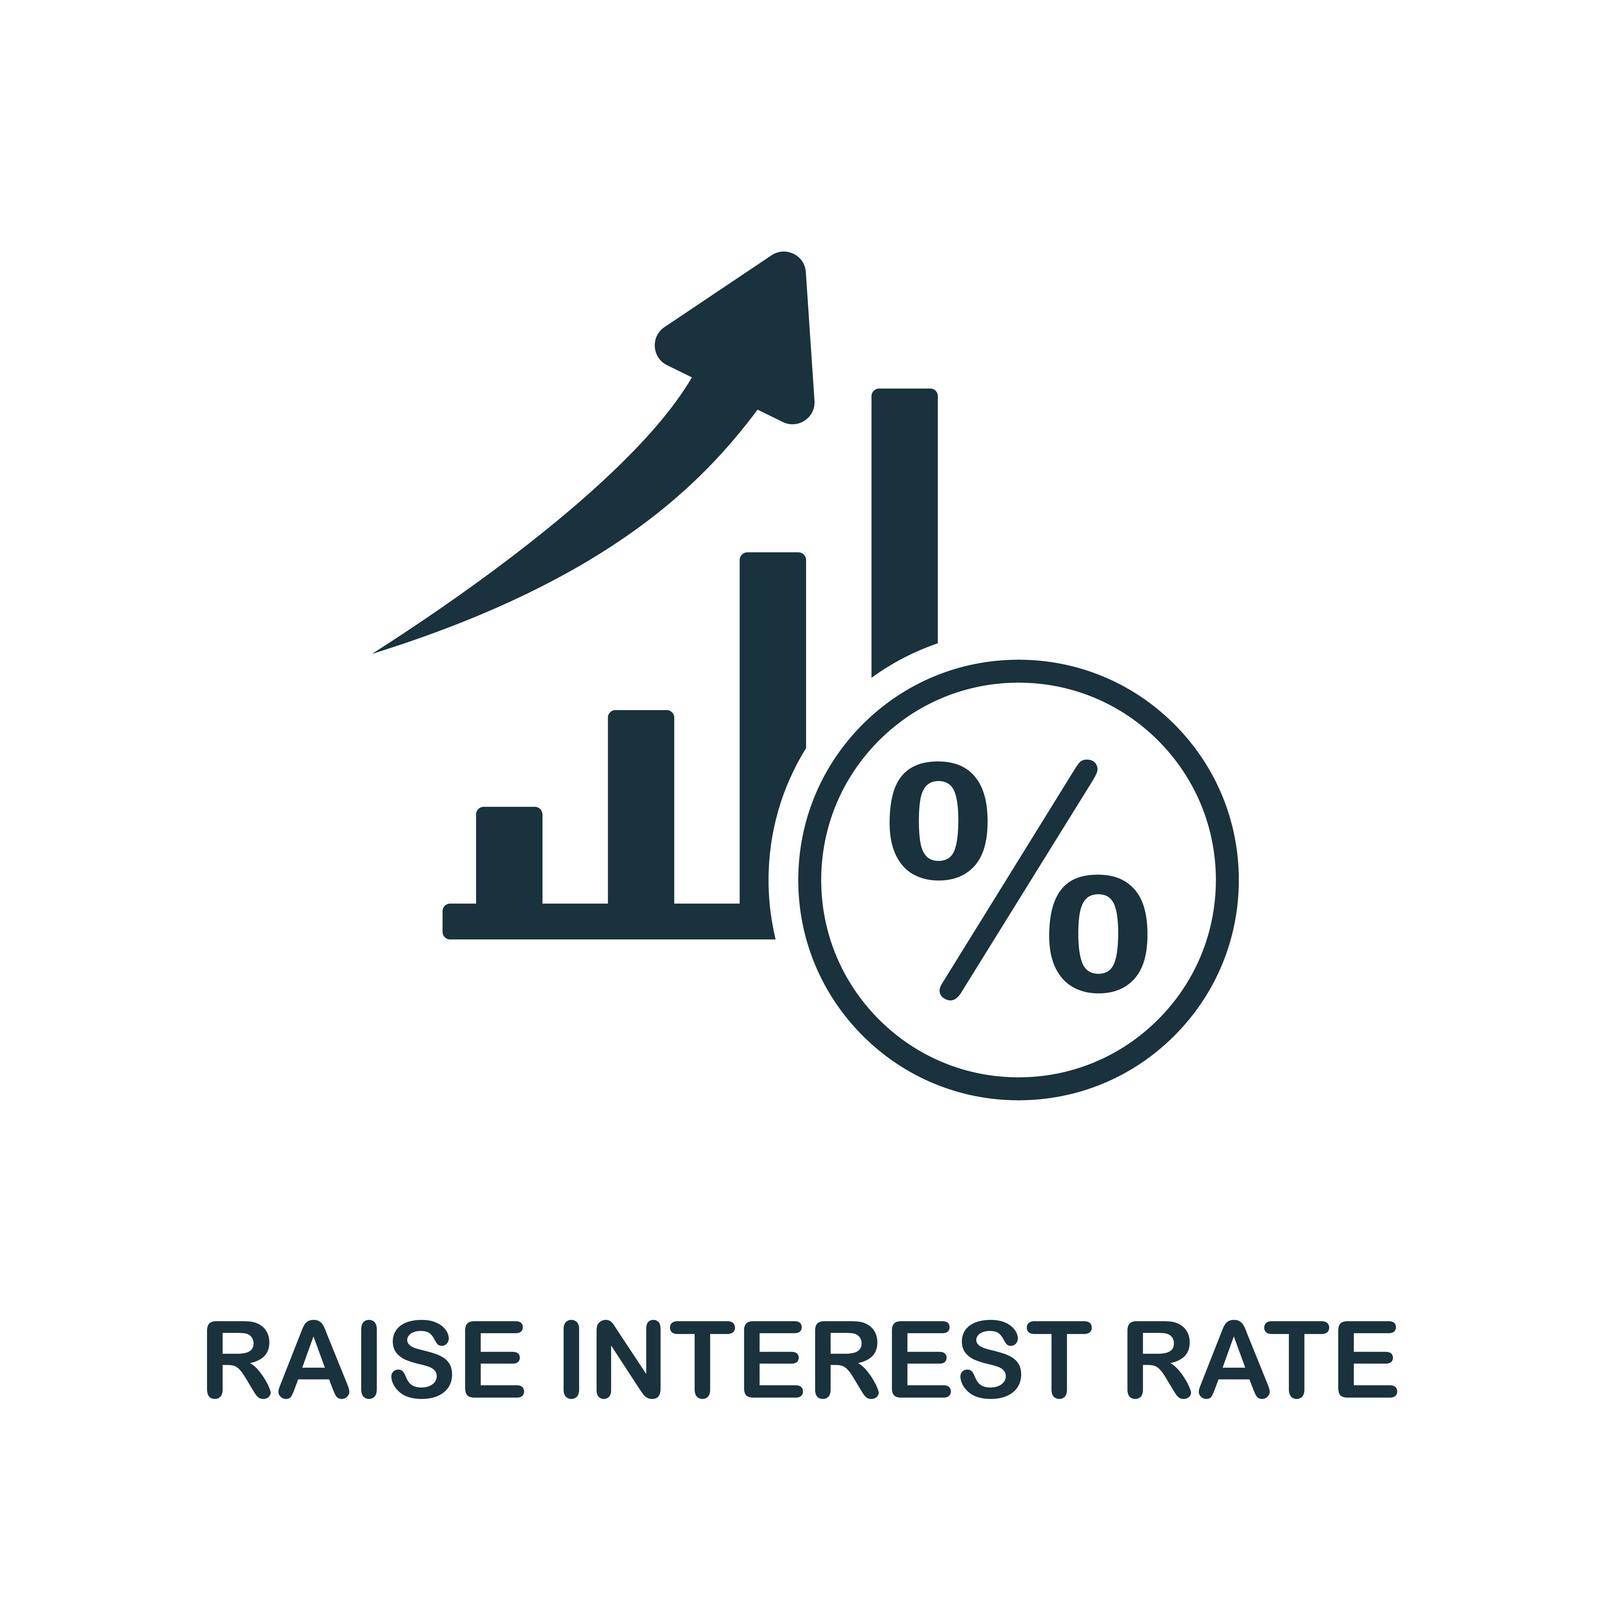 Raise Interest Rate icon. Monochrome simple Raise Interest Rate icon for templates, web design and infographics by simakovavector